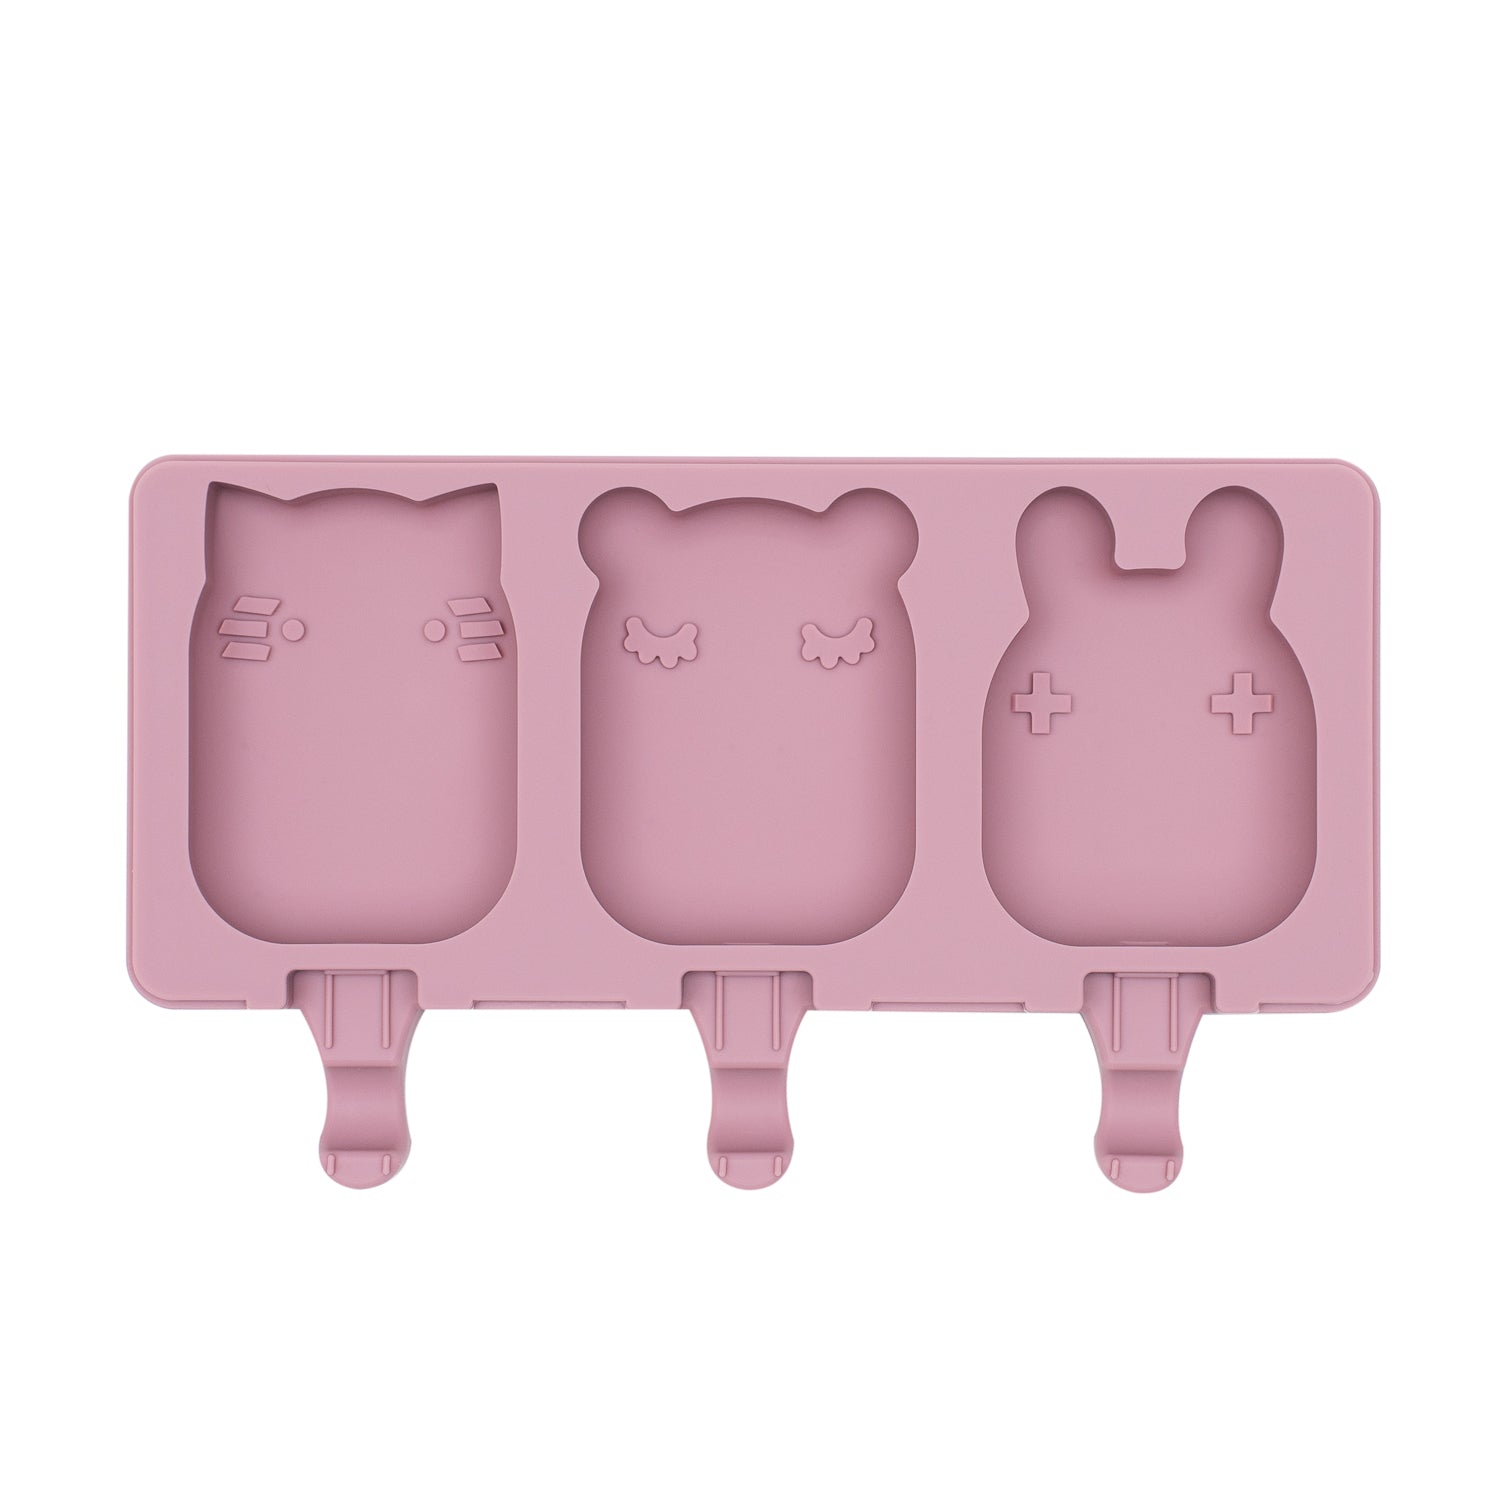 Frosties Icy pole Mould - Dusty Rose